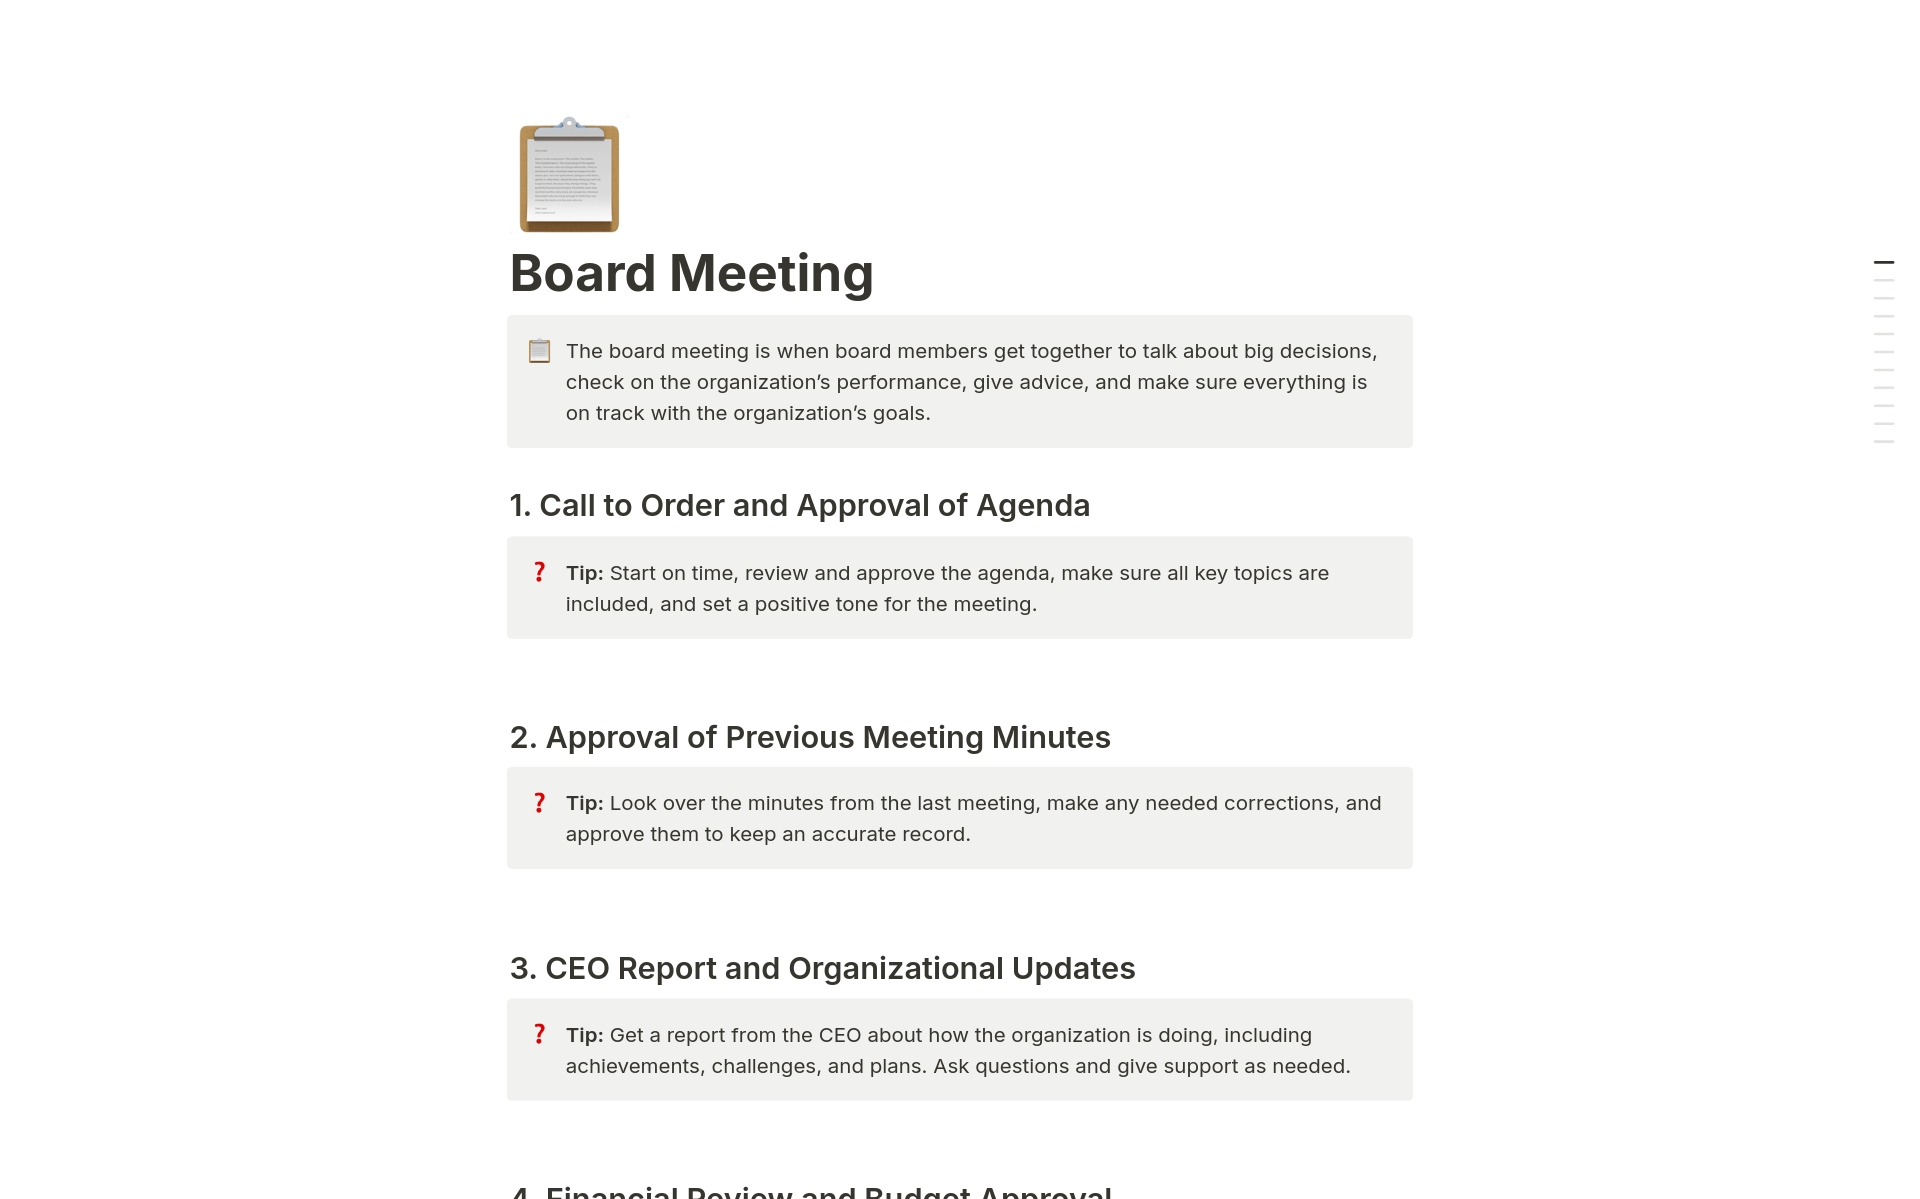 The board meeting is when board members get together to talk about big decisions, check on the organization’s performance, give advice, and make sure everything is on track with the organization’s goals.